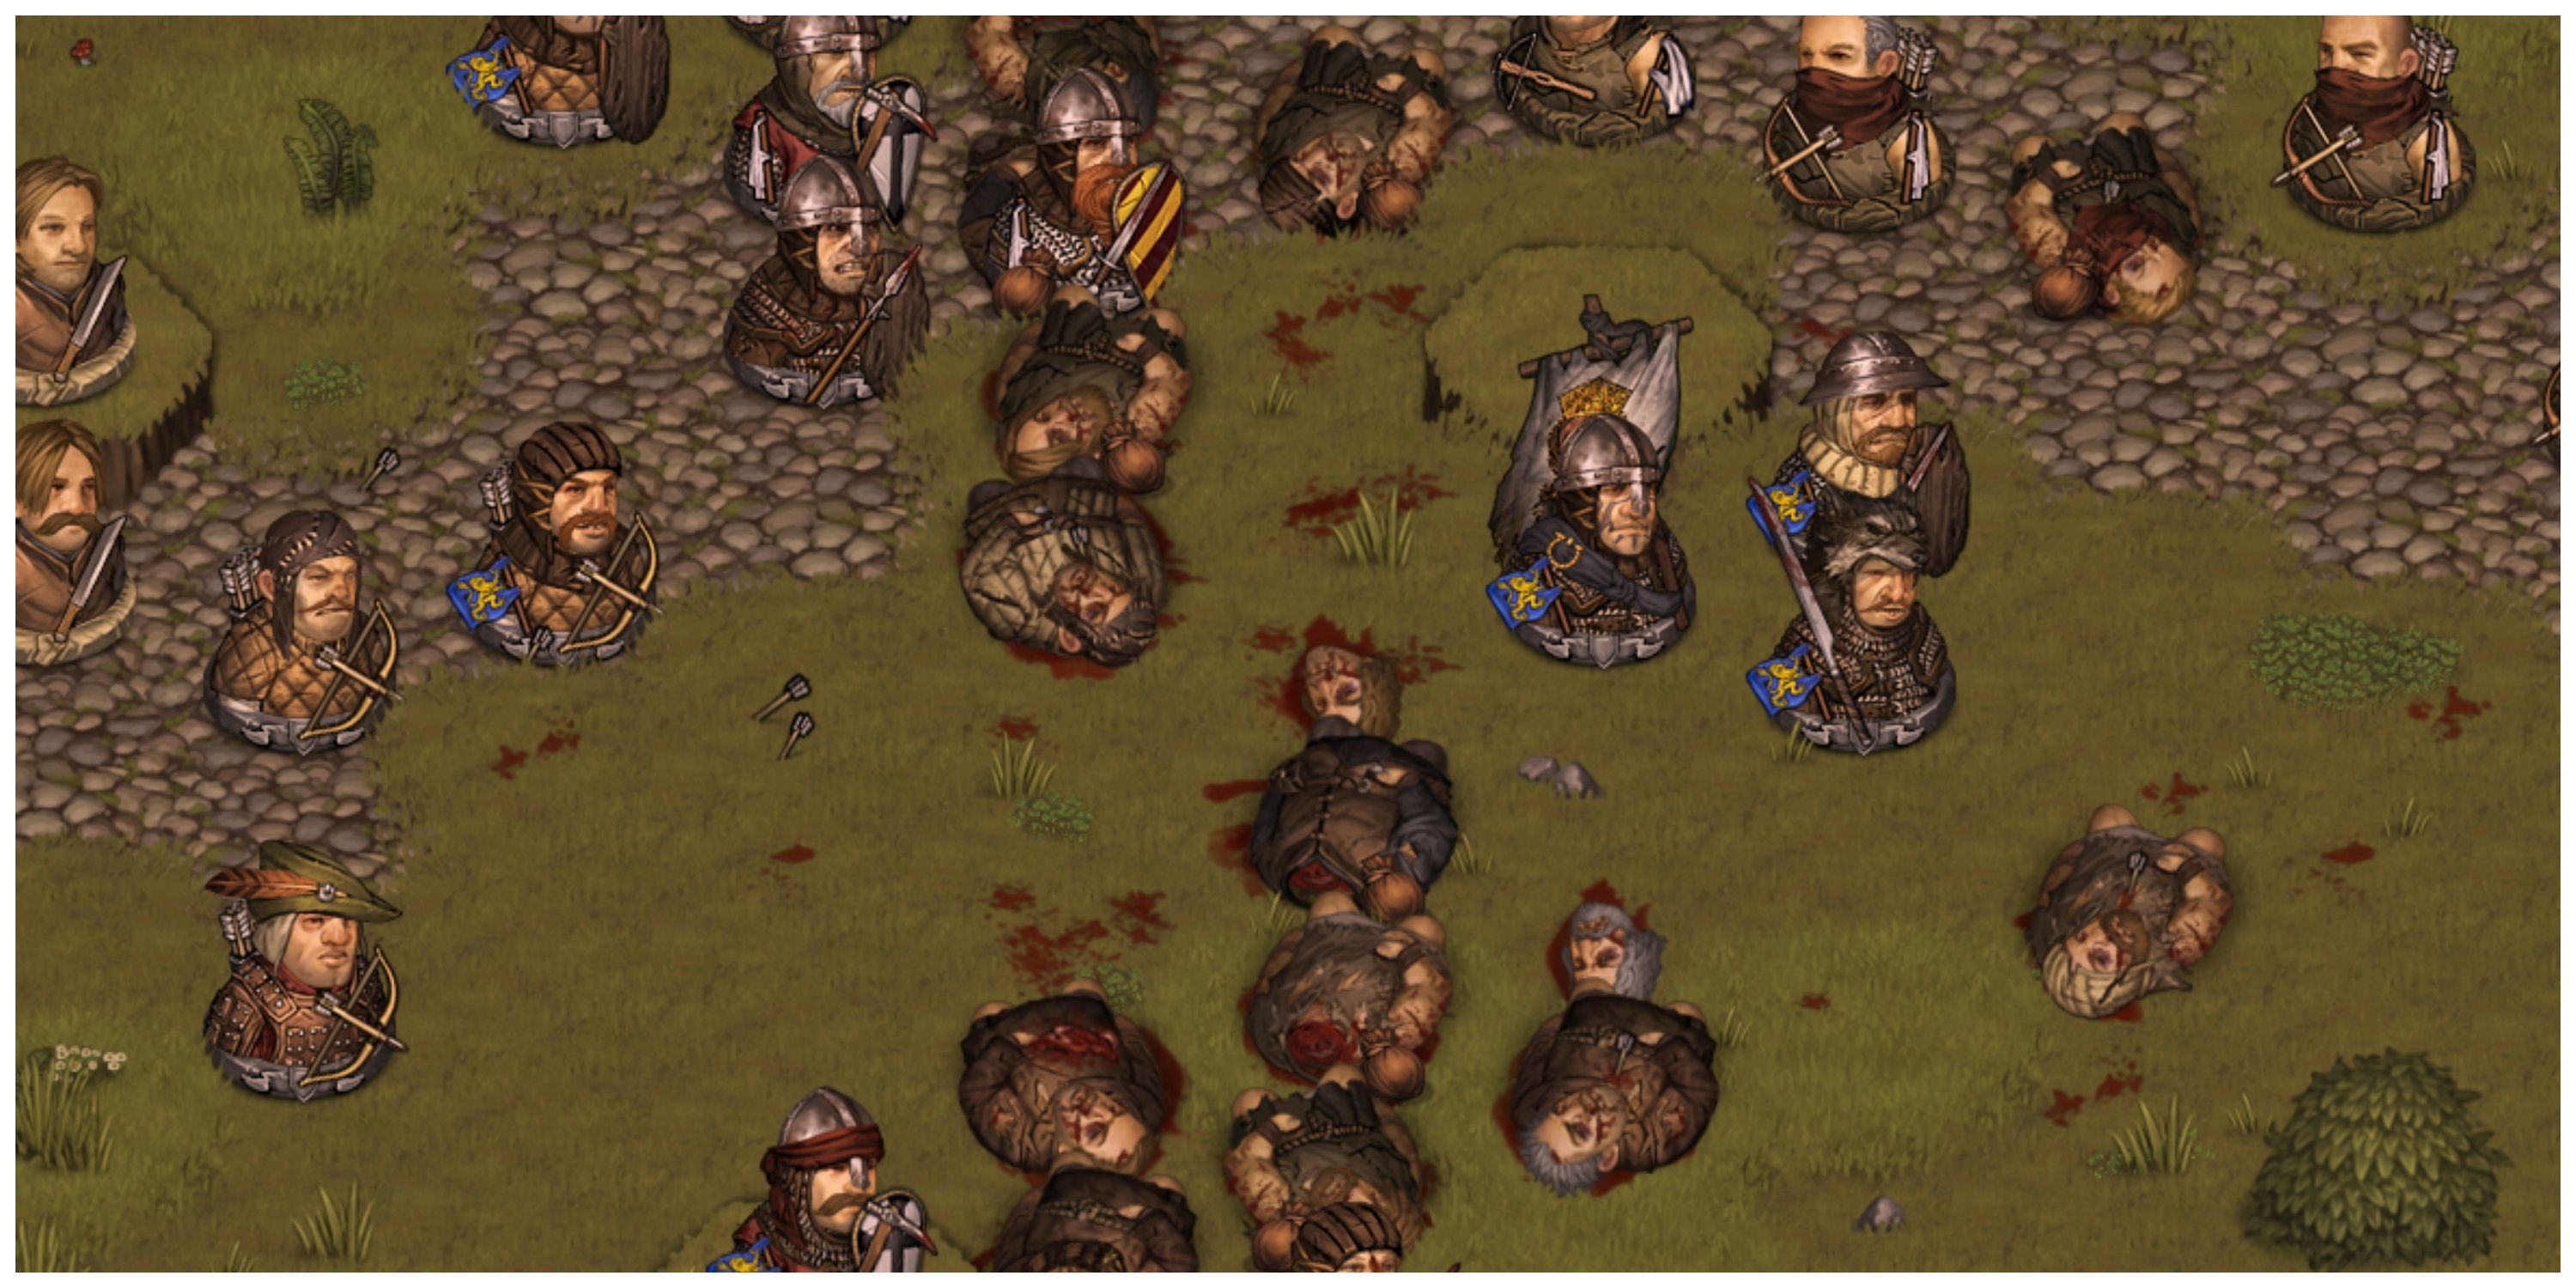 Battle Brothers - Steam Store Page Screenshot (Several Soldiers Fighting)